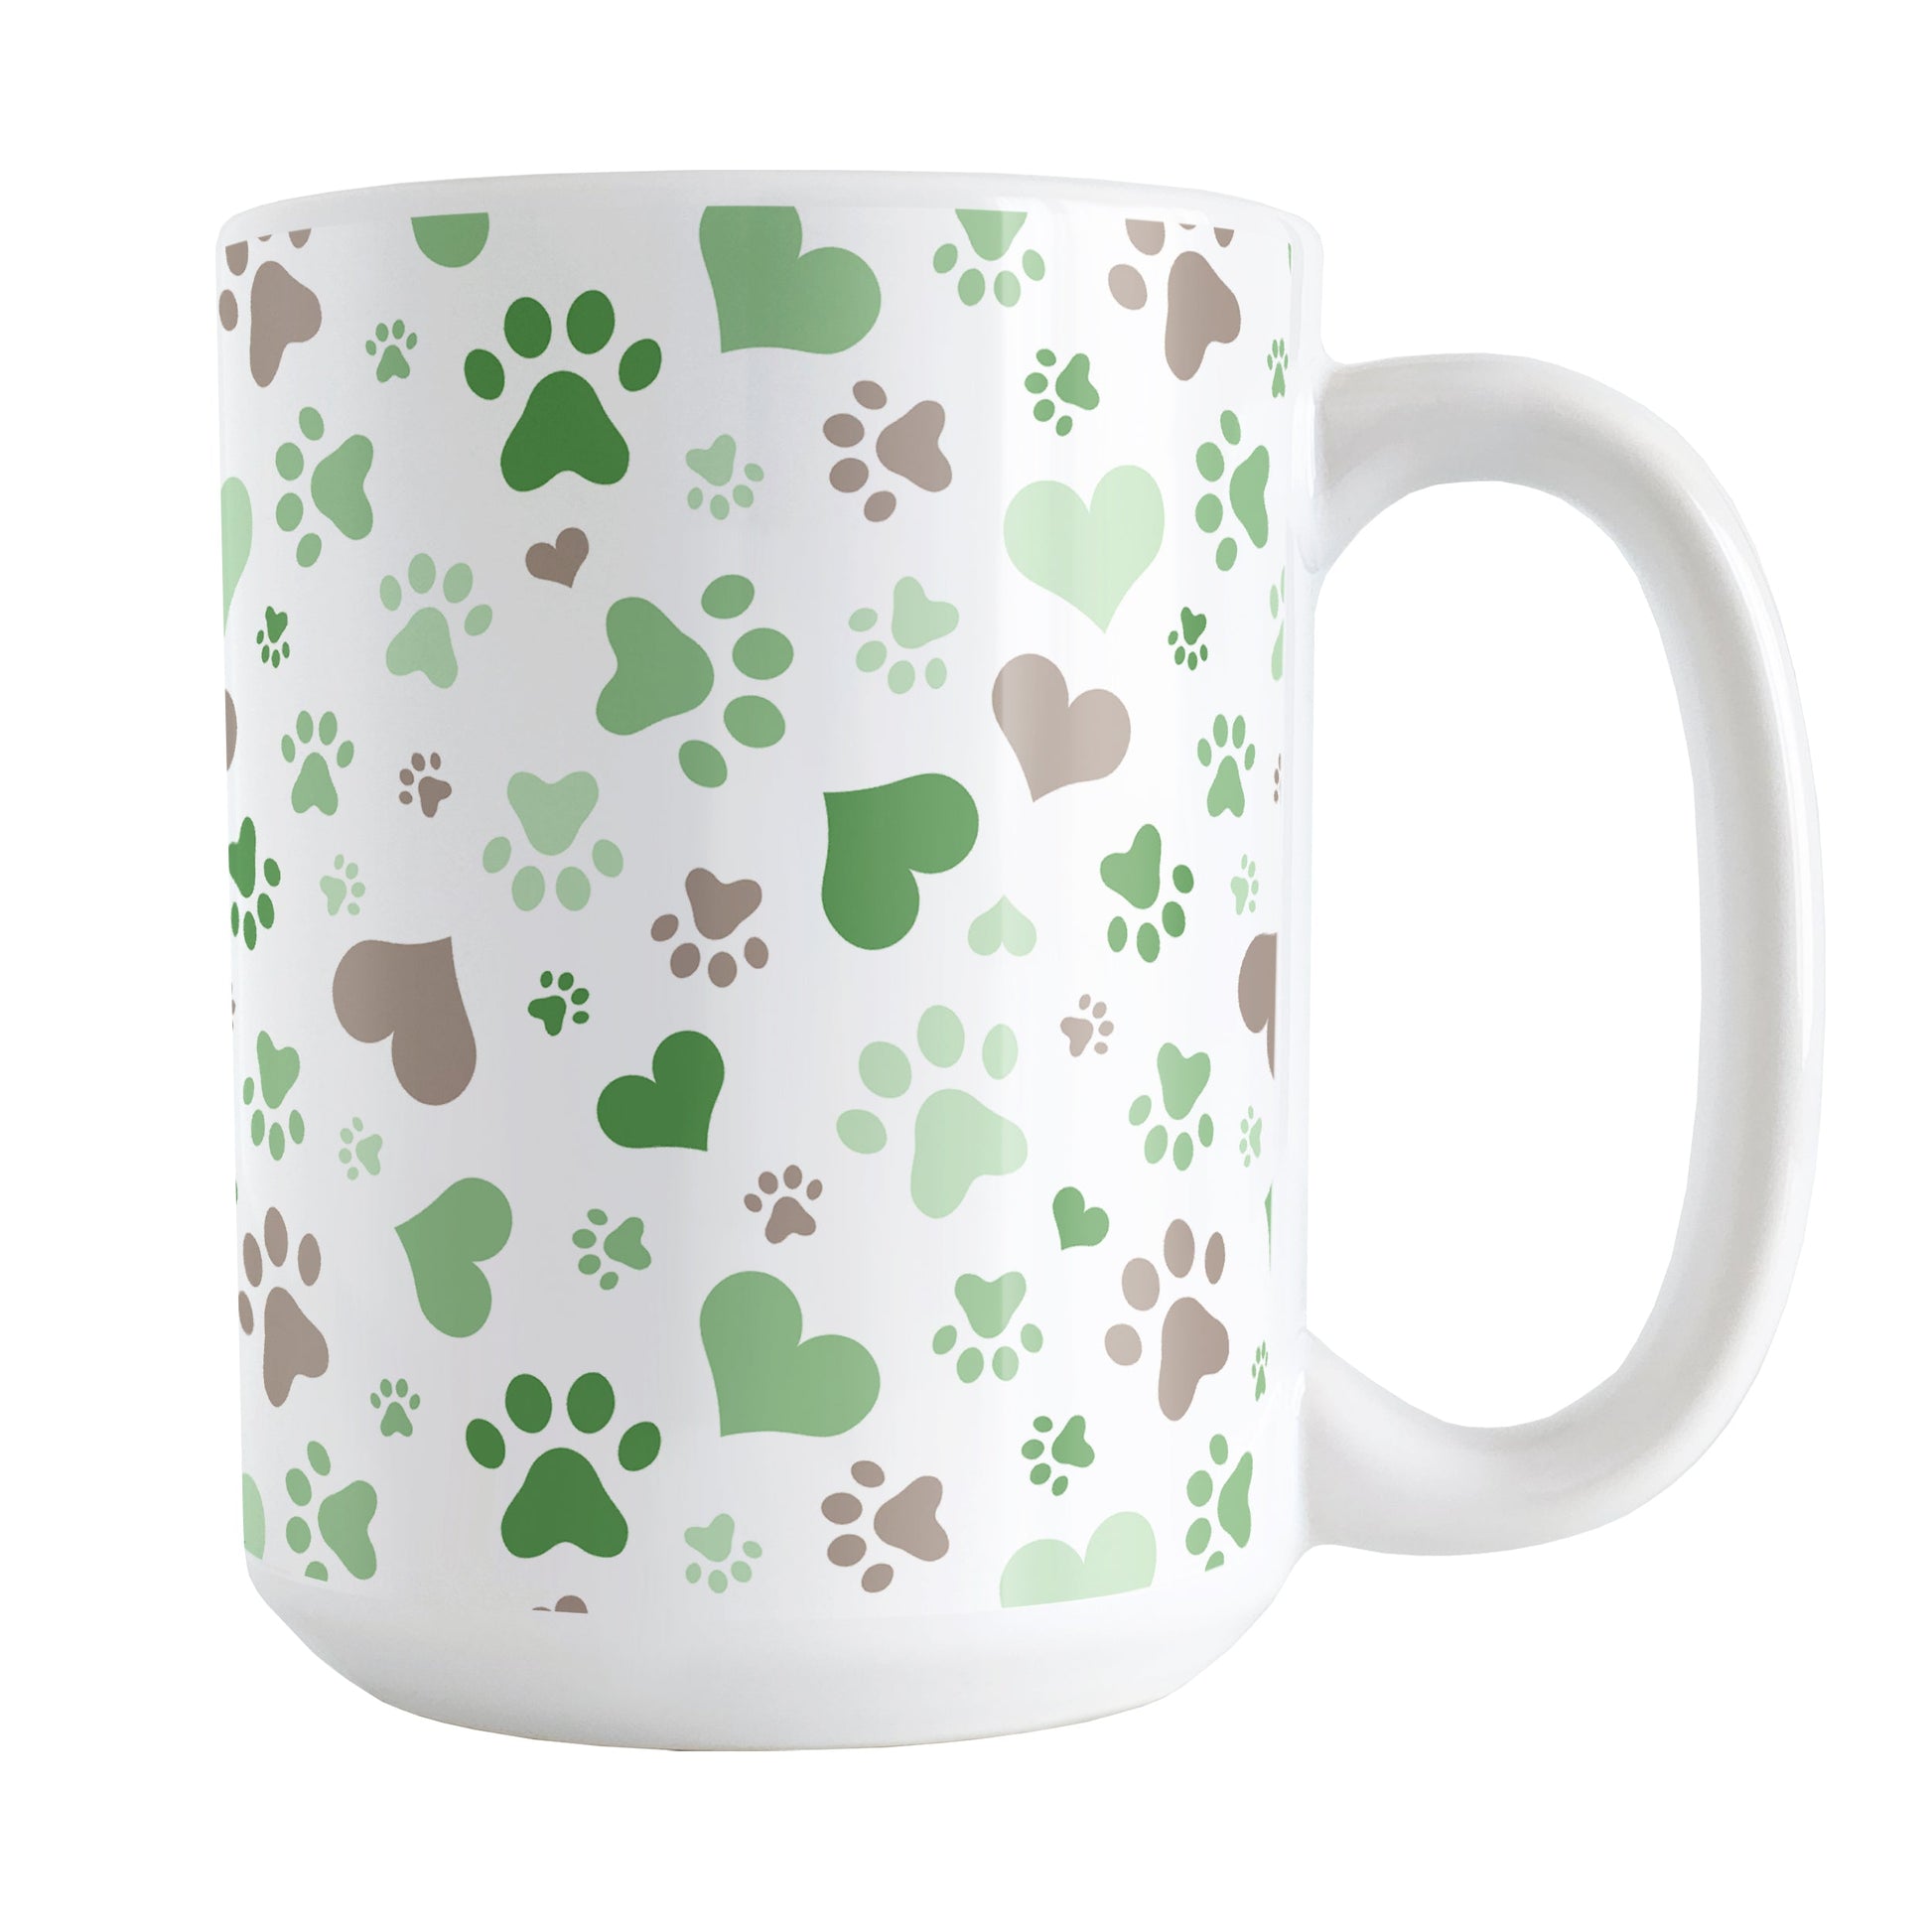 Green Hearts and Paw Prints Mug (15oz) at Amy's Coffee Mugs. A ceramic coffee mug designed with a pattern of hearts and paw prints in brown and different shades of green that wraps around the mug to the handle. This mug is perfect for people love dogs and cute paw print designs.